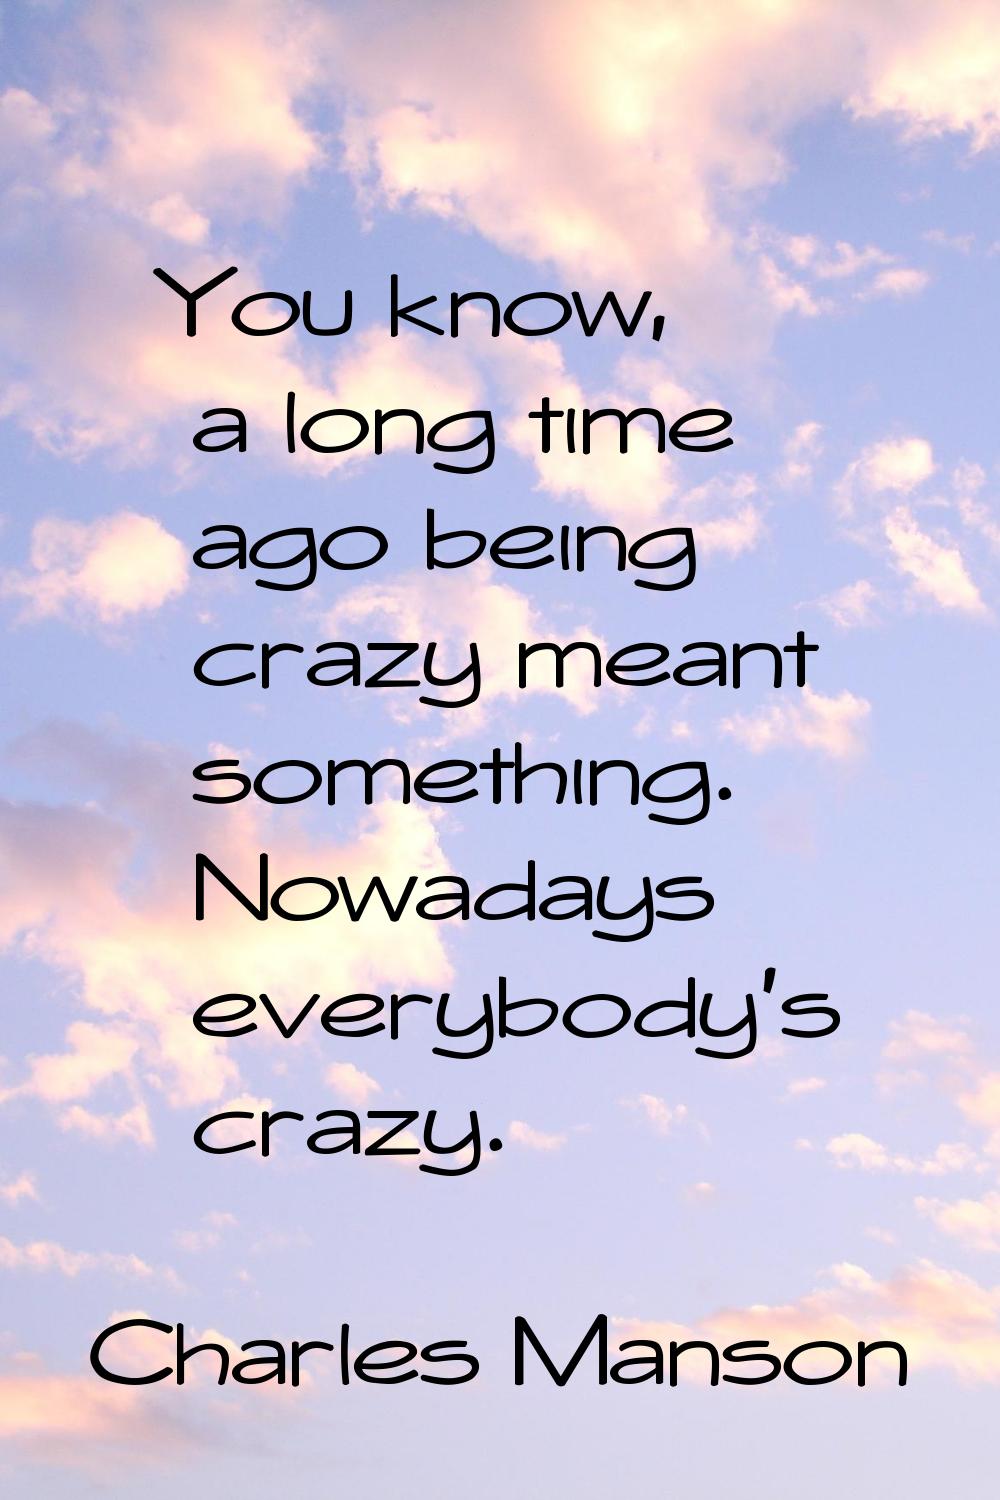 You know, a long time ago being crazy meant something. Nowadays everybody's crazy.